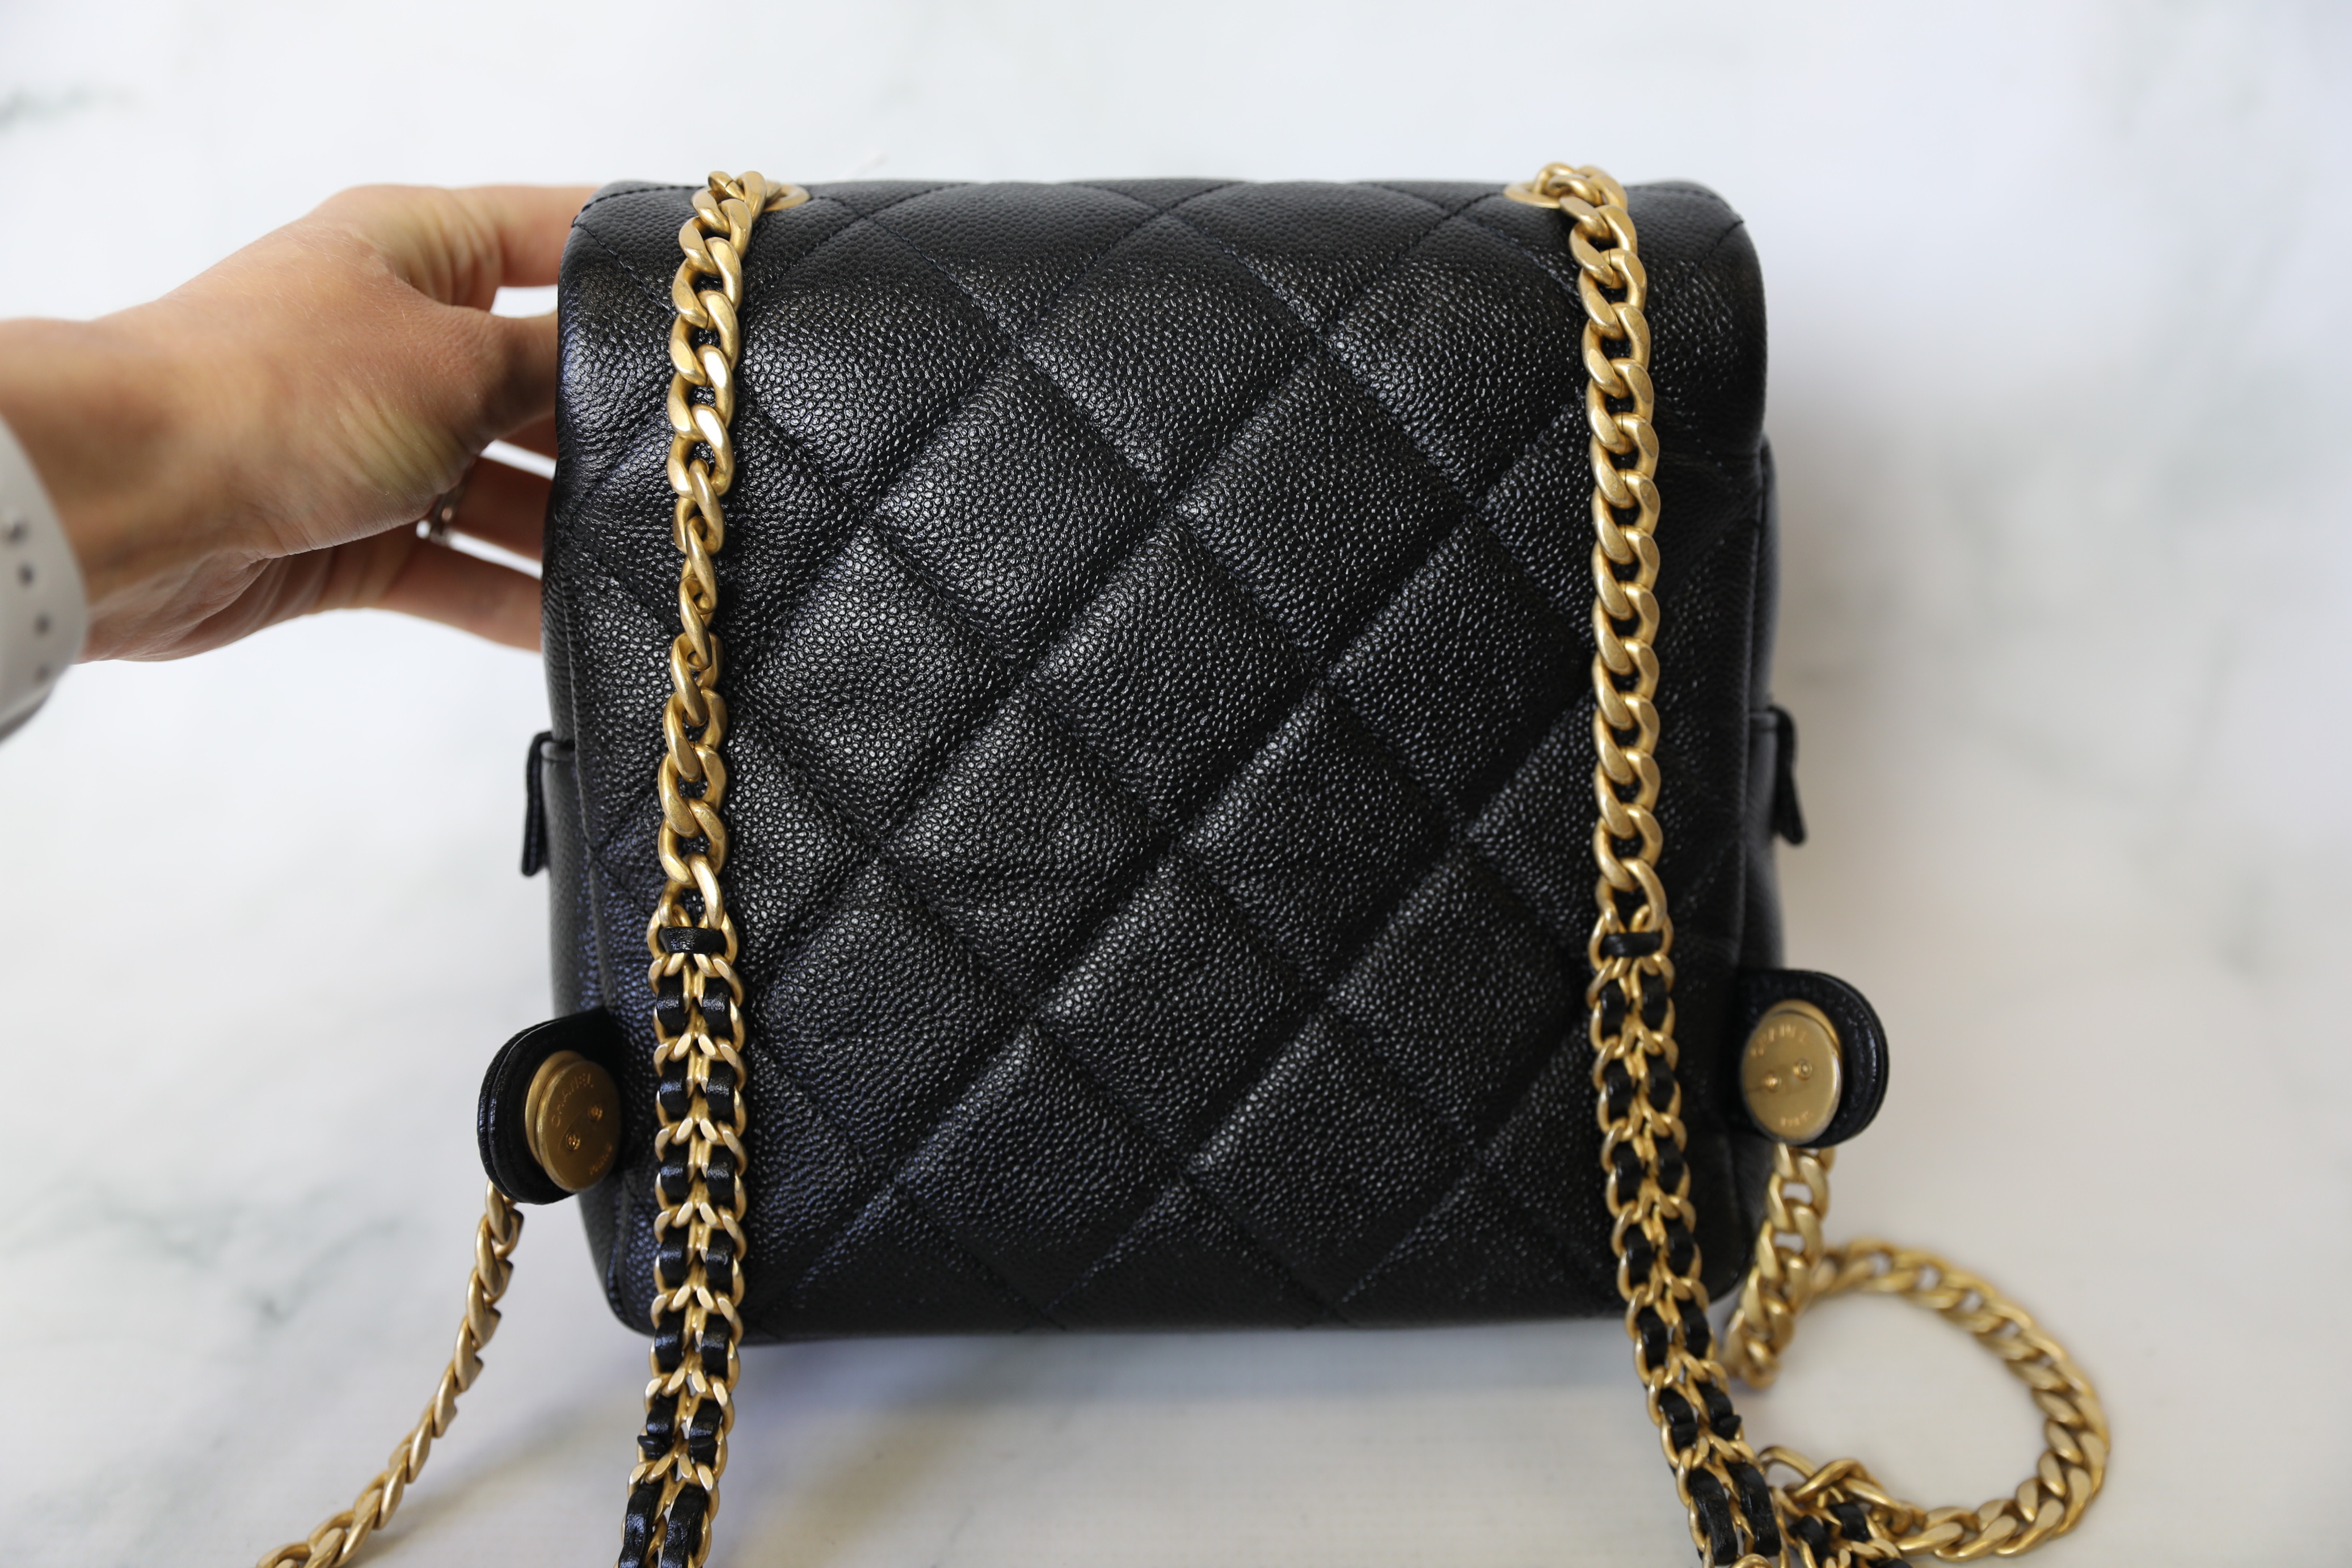 CHANEL, Bags, Chanel Backpack